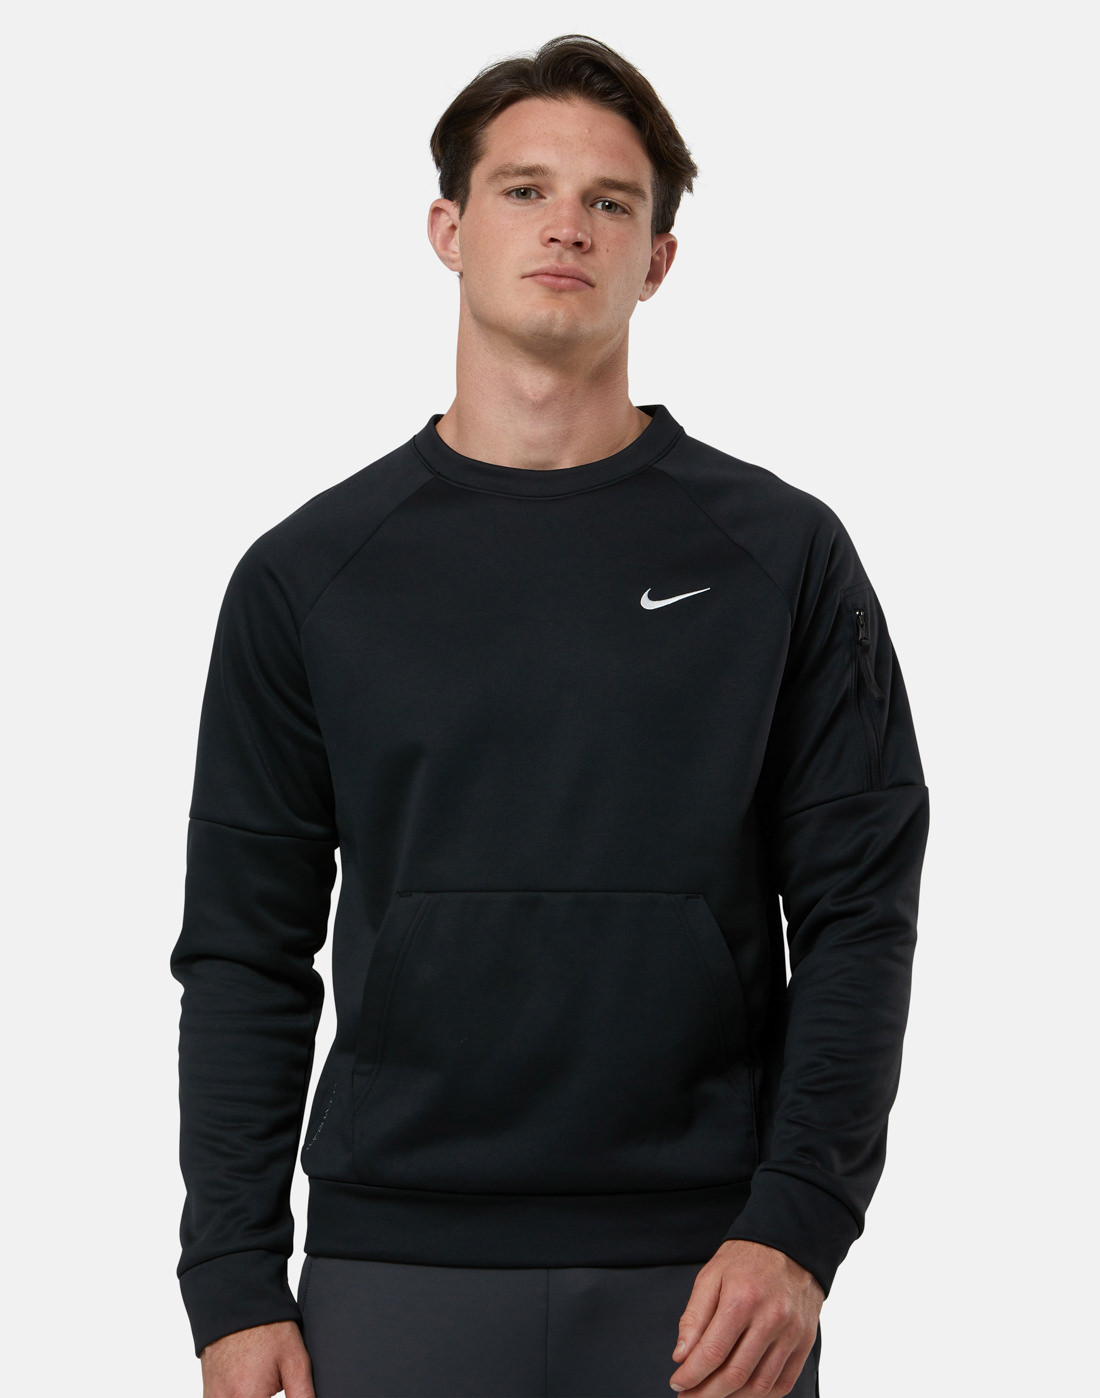 Nike Mens Therma Fit Crew - Black | Life Style Sports IE